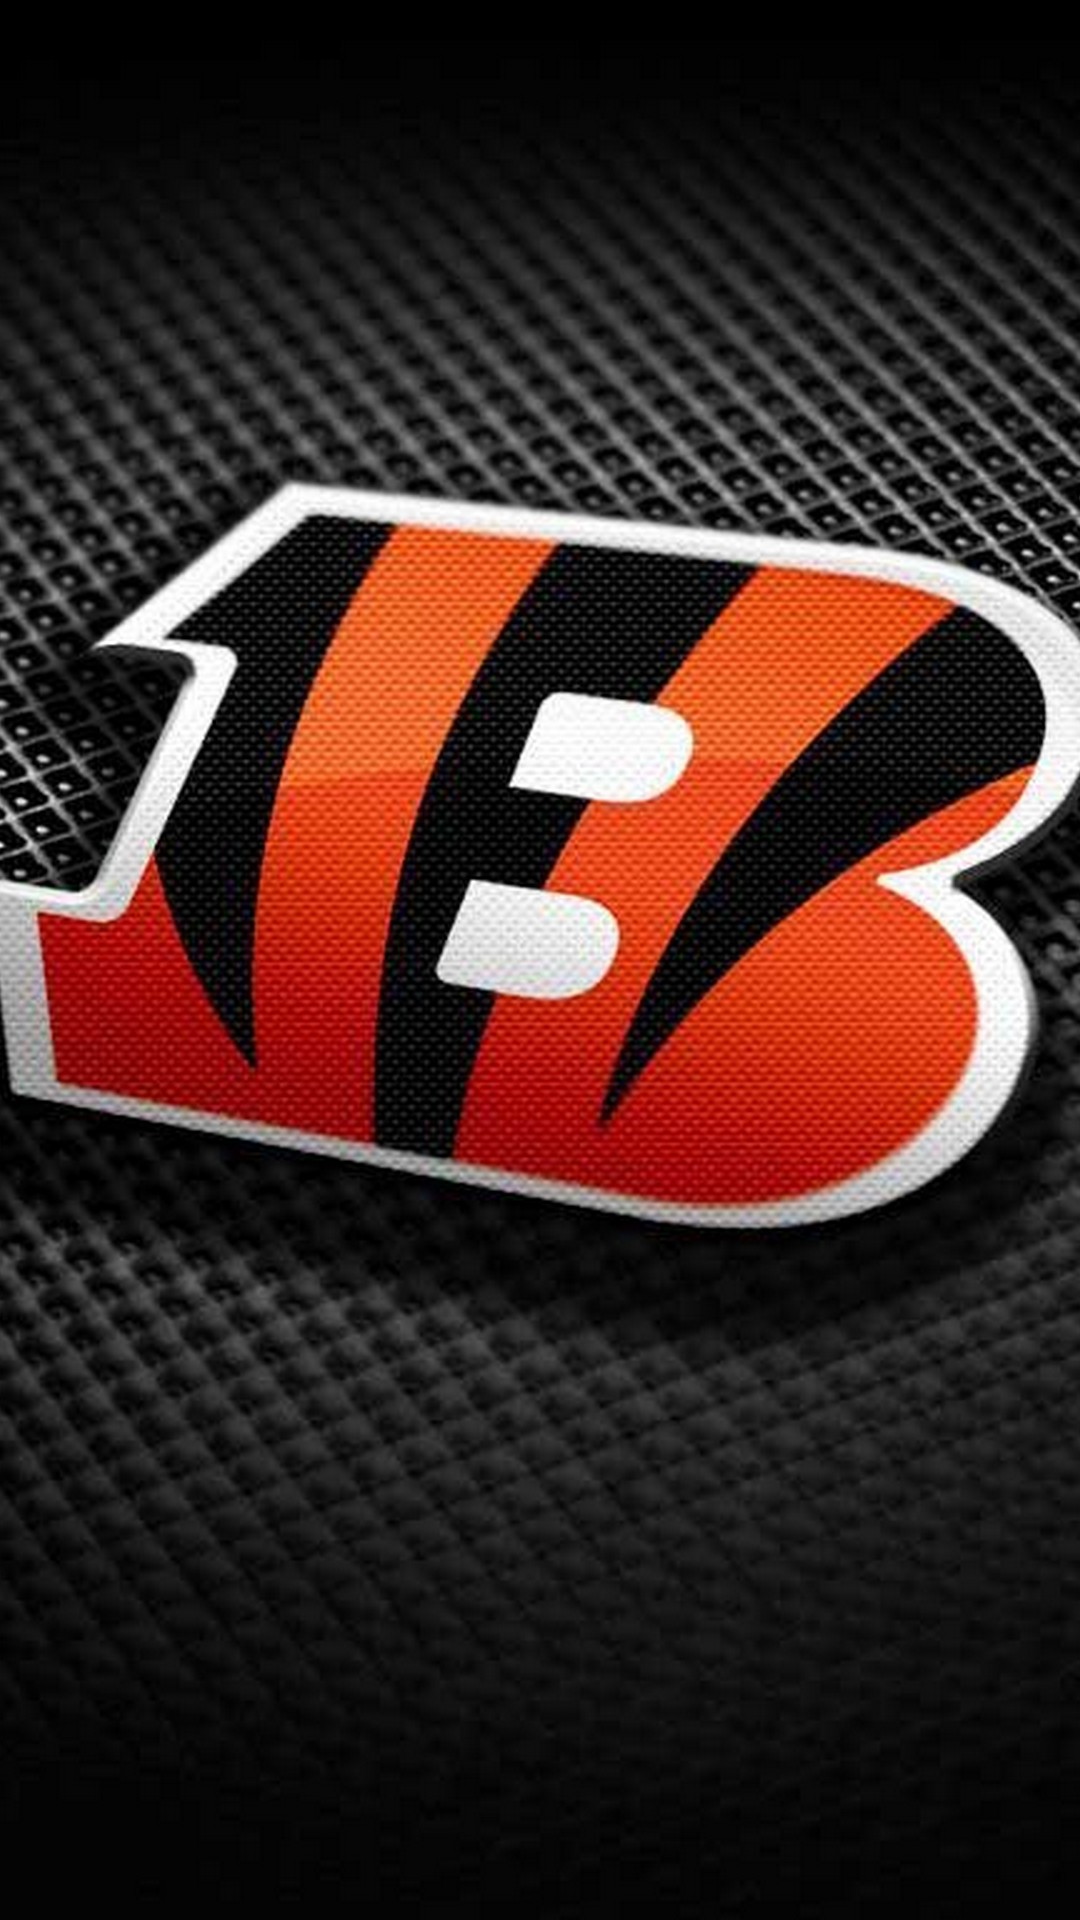 Cincinnati Bengals iPhone Wallpaper Size with high-resolution 1080x1920 pixel. Donwload and set as wallpaper for your iPhone X, iPhone XS home screen backgrounds, XS Max, XR, iPhone8 lock screen wallpaper, iPhone 7, 6, SE and other mobile devices